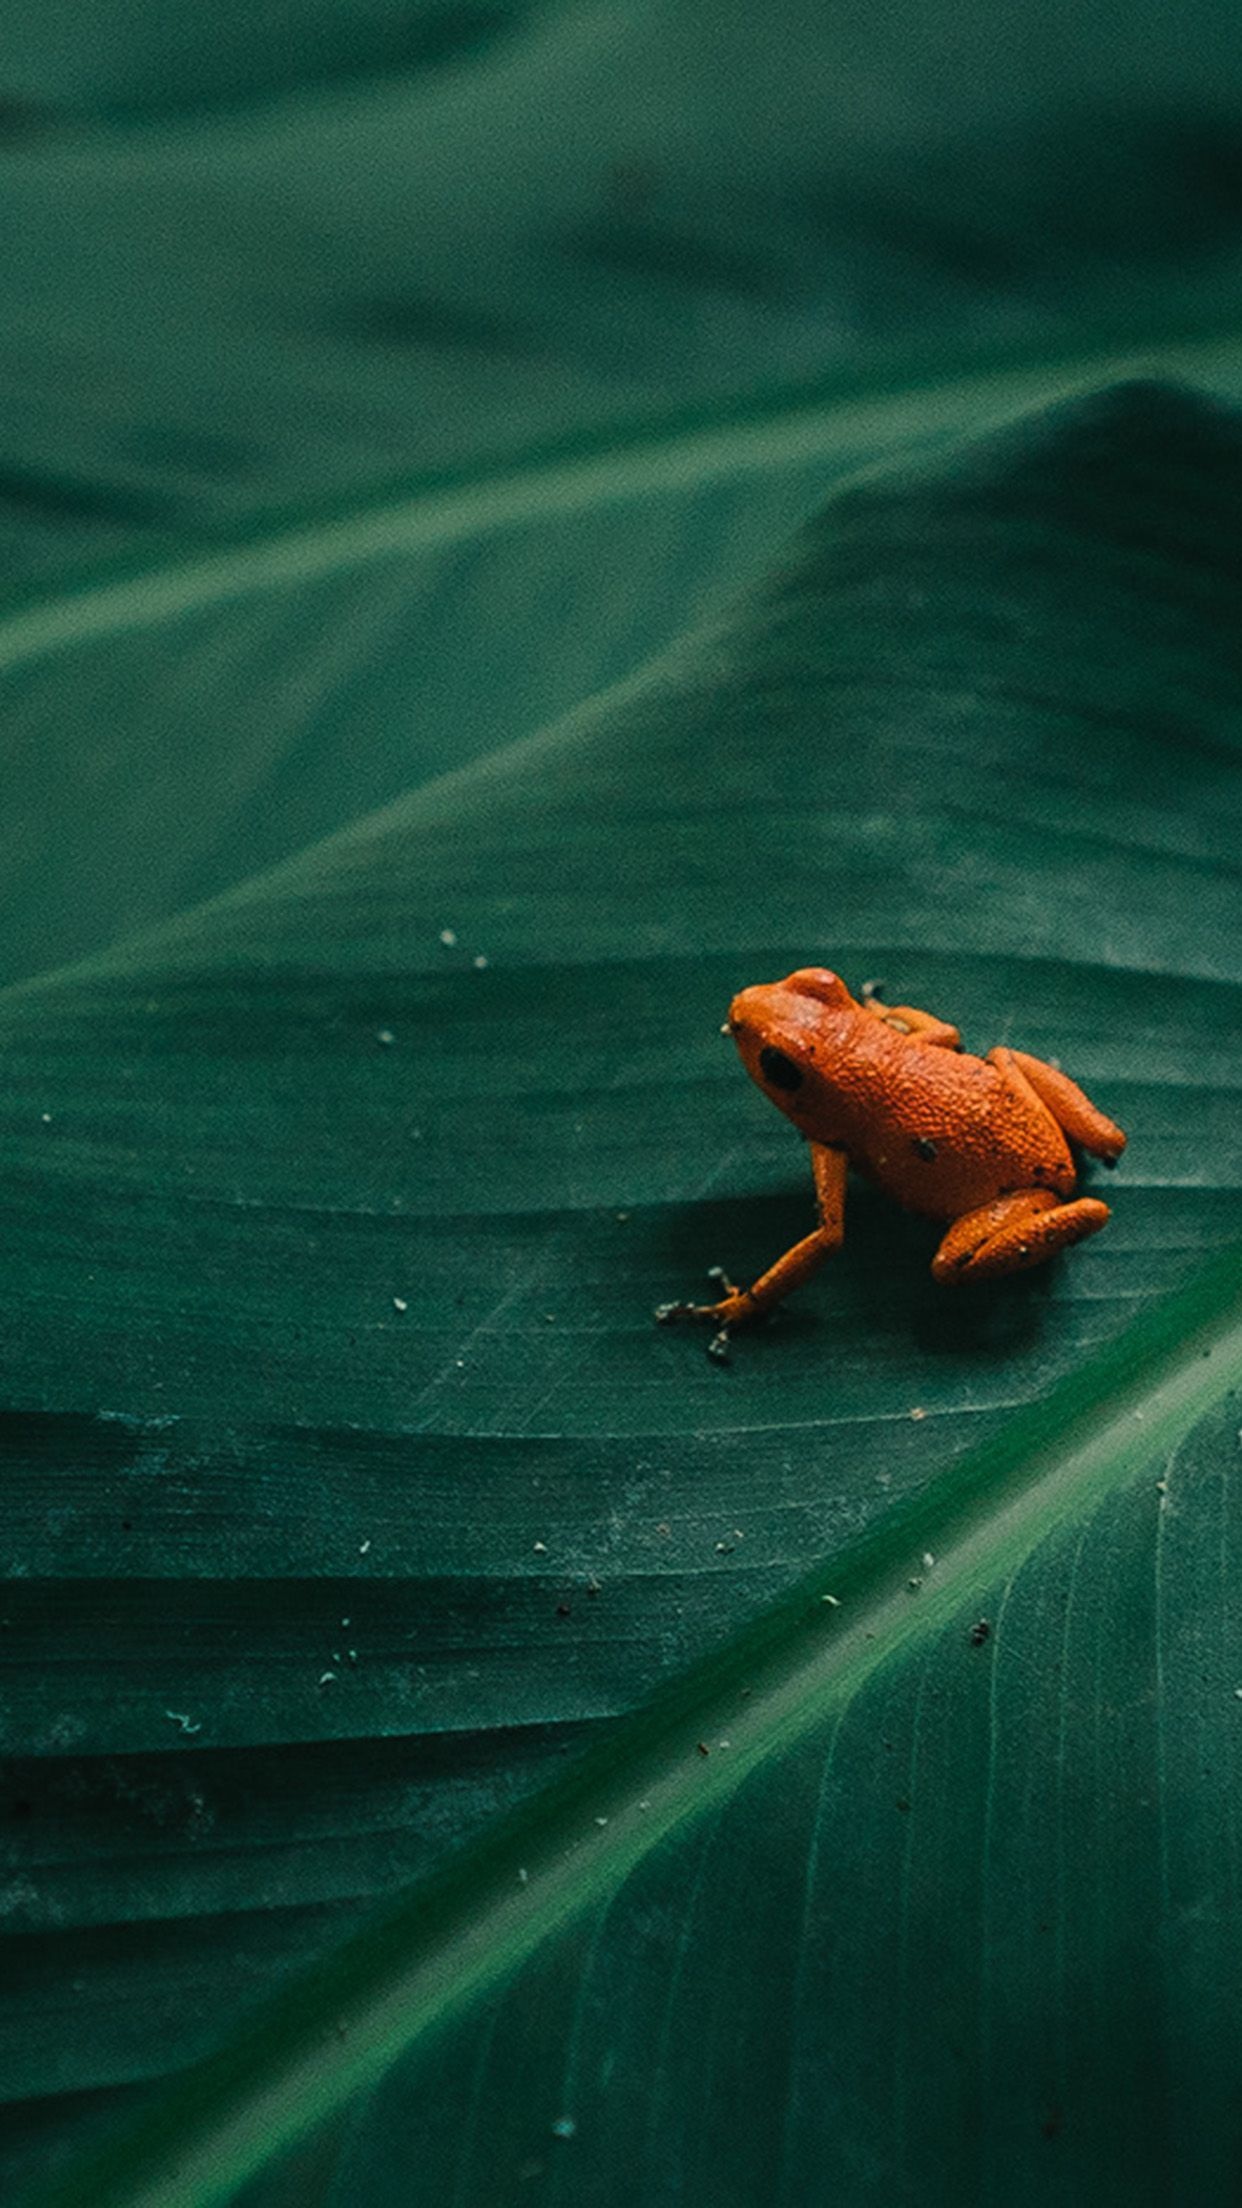 4K HD frog iPhone wallpapers, Frog iPhone backgrounds, Wallpaper collection, Nature-themed, 1250x2210 HD Phone